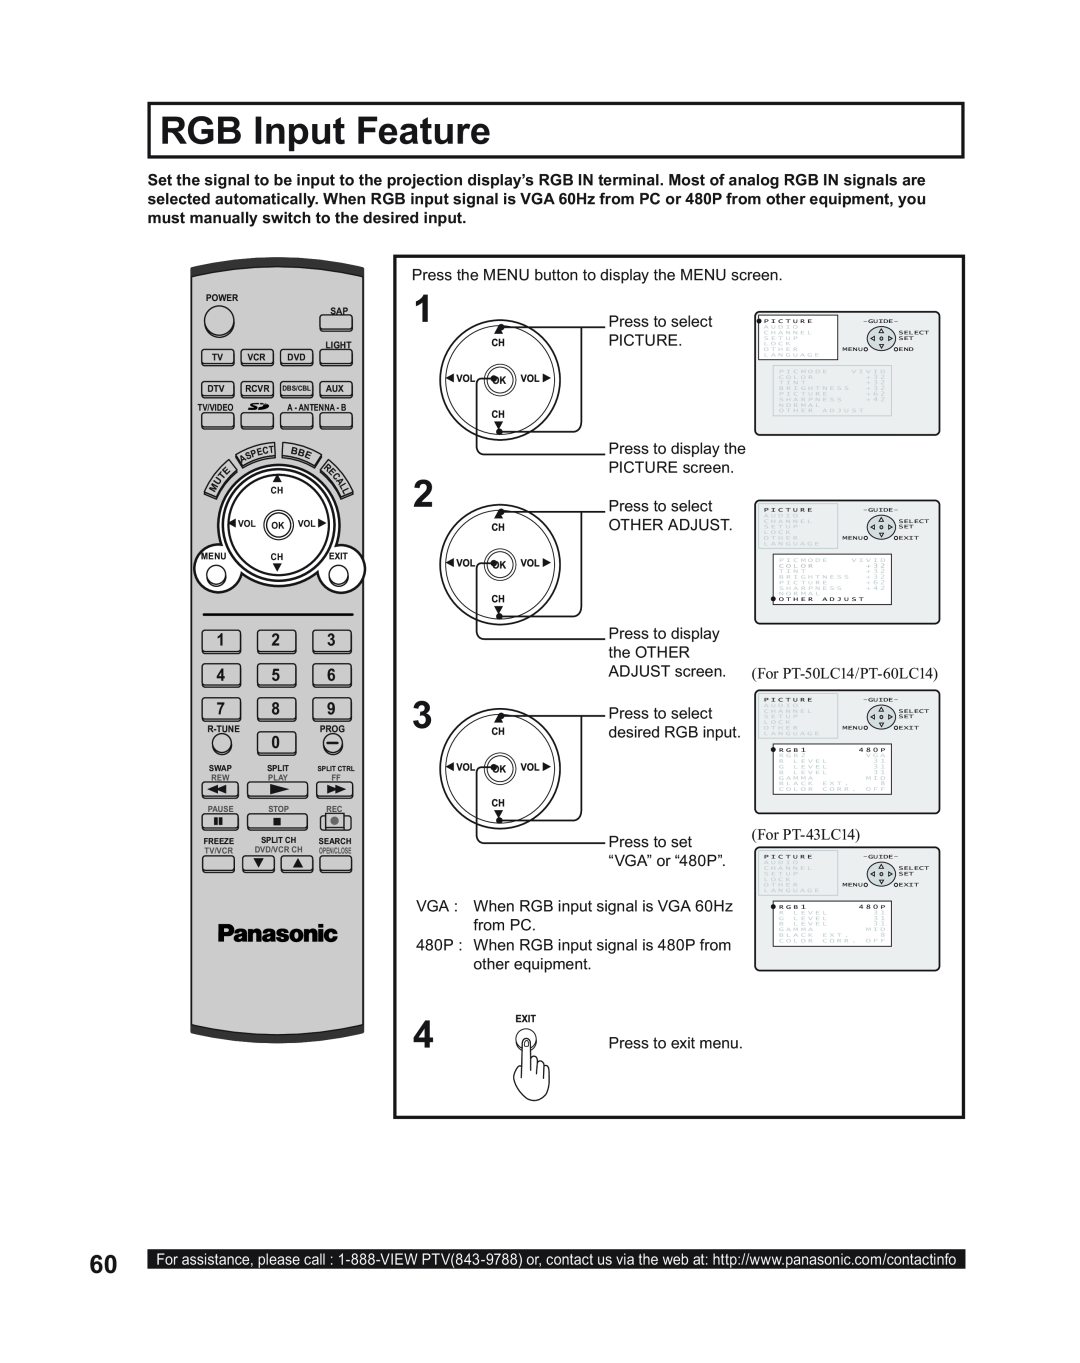 Panasonic manual RGB Input Feature, ADJUST screen. For PT-50LC14/PT-60LC14, For PT-43LC14 